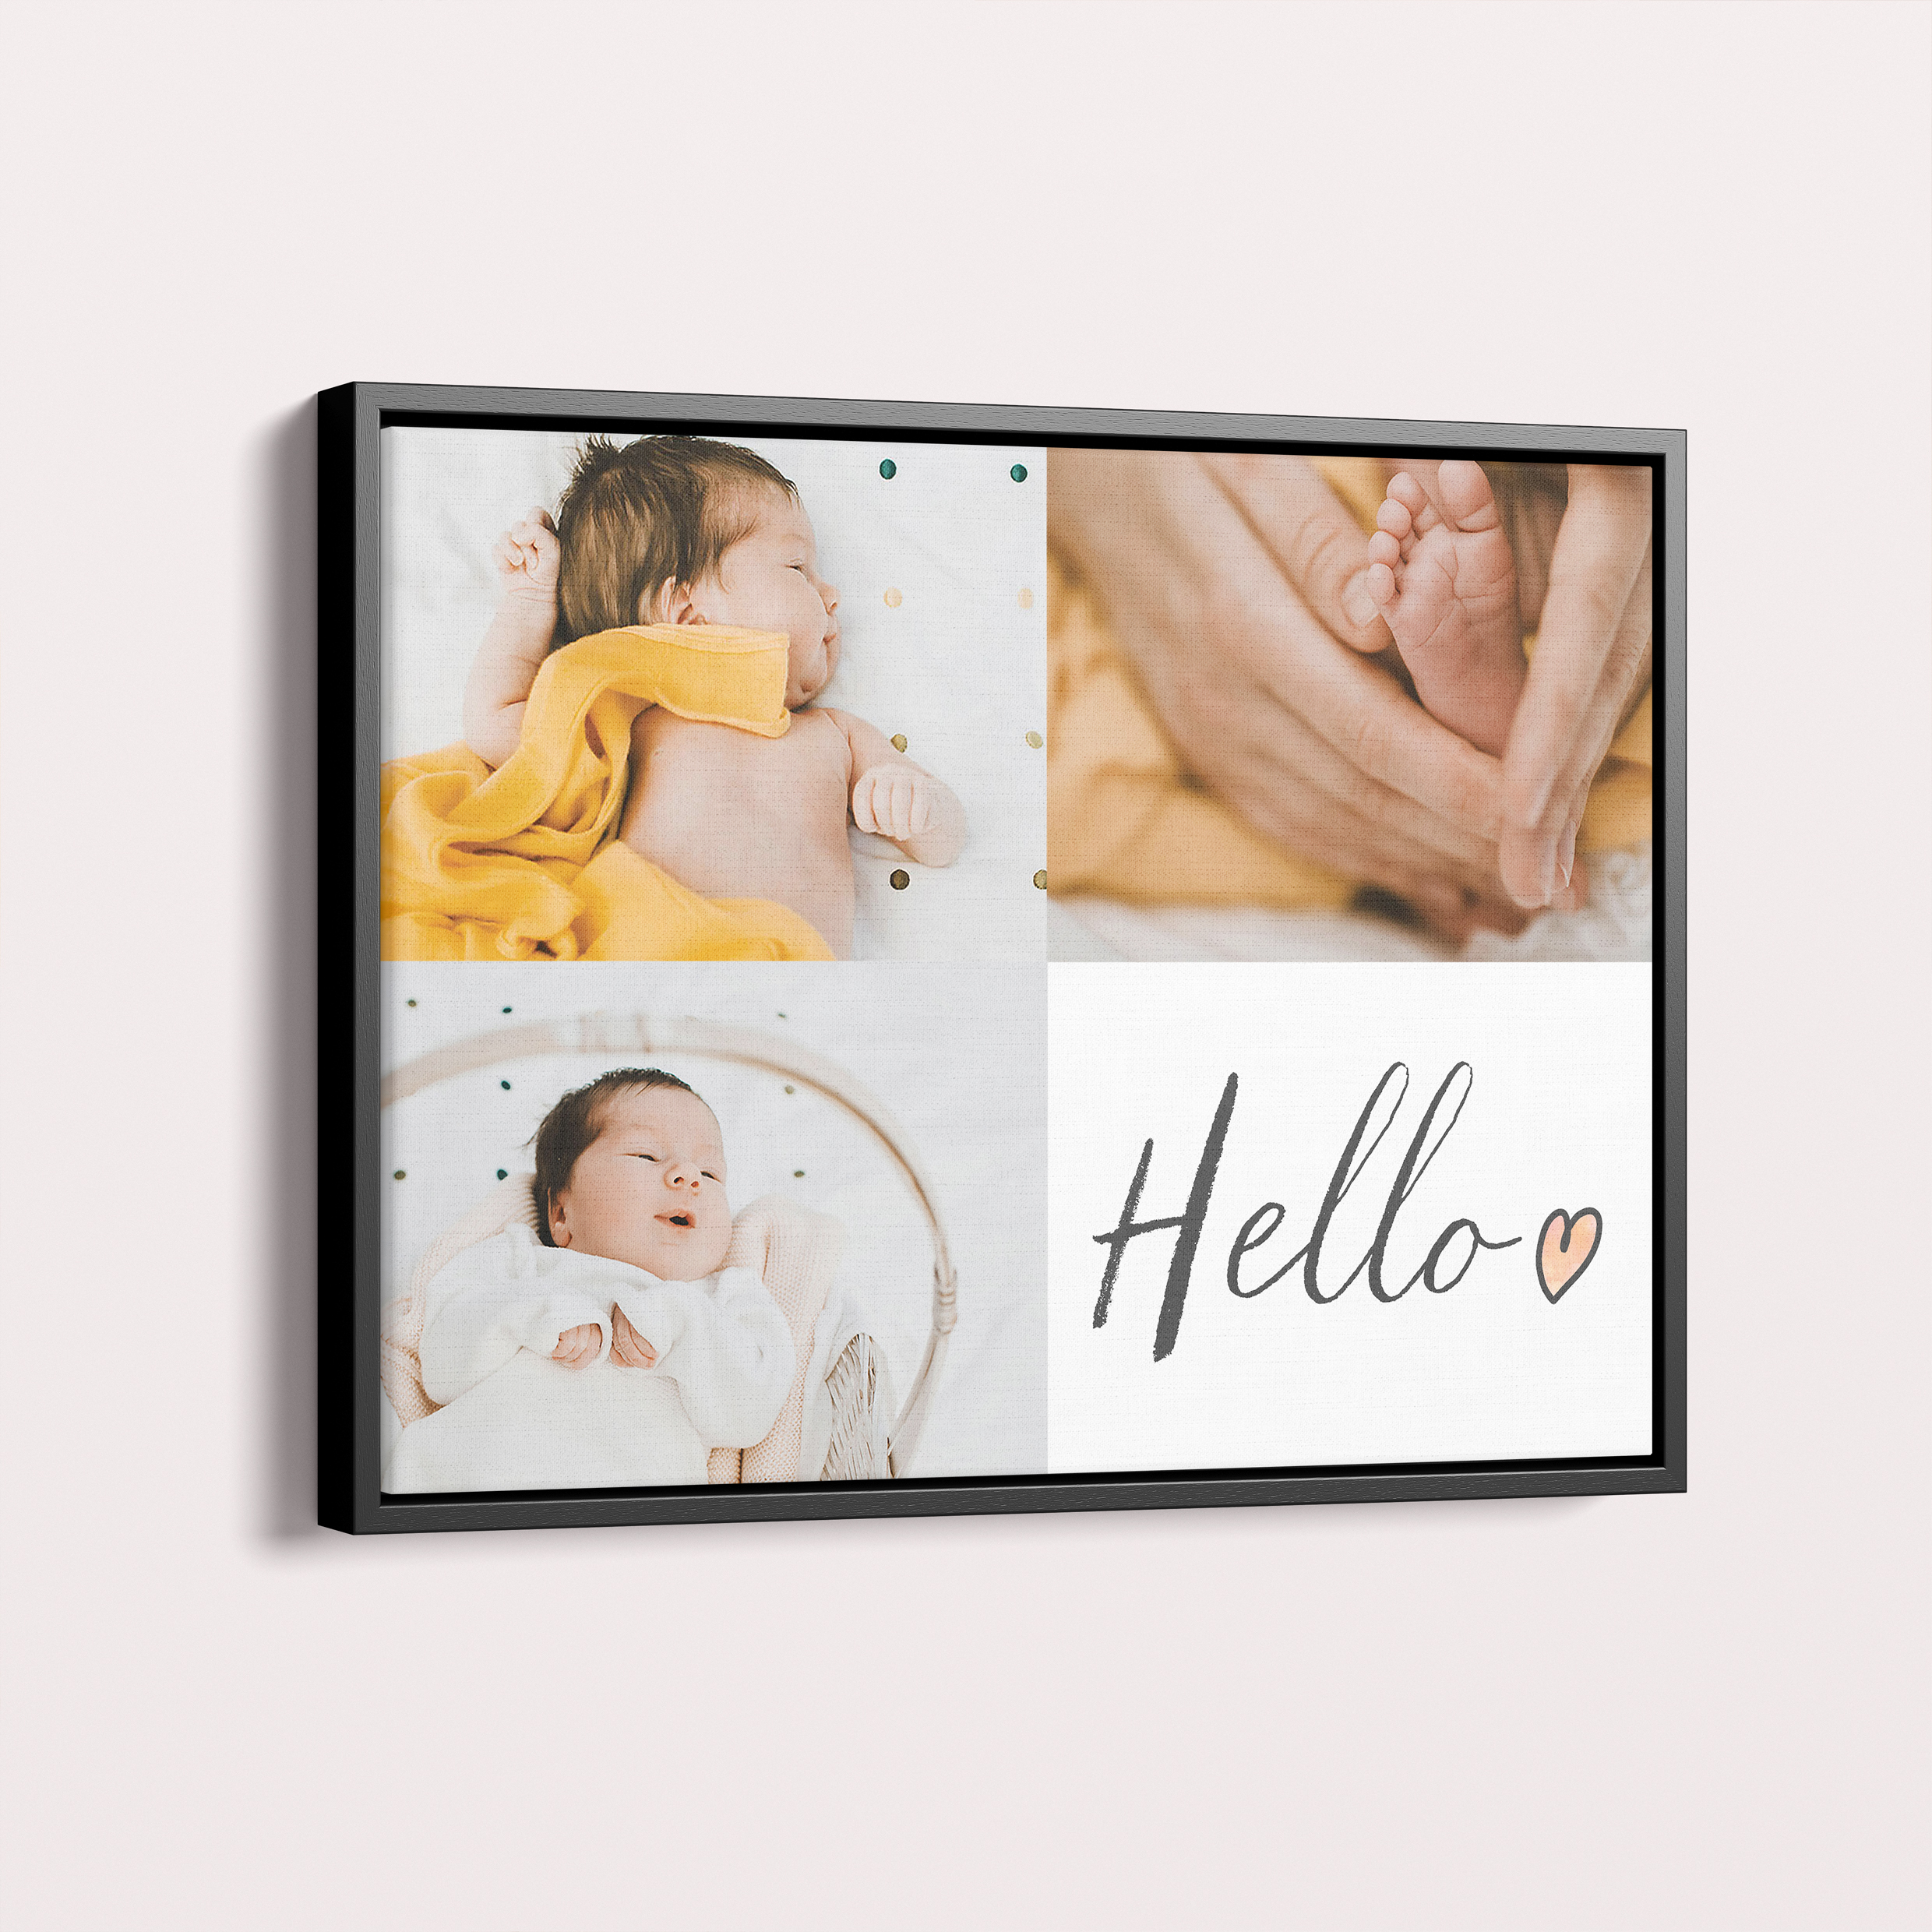 Personalised Triple Play Hello Framed Photo Collage - Celebrate Joy with Utterly Printable